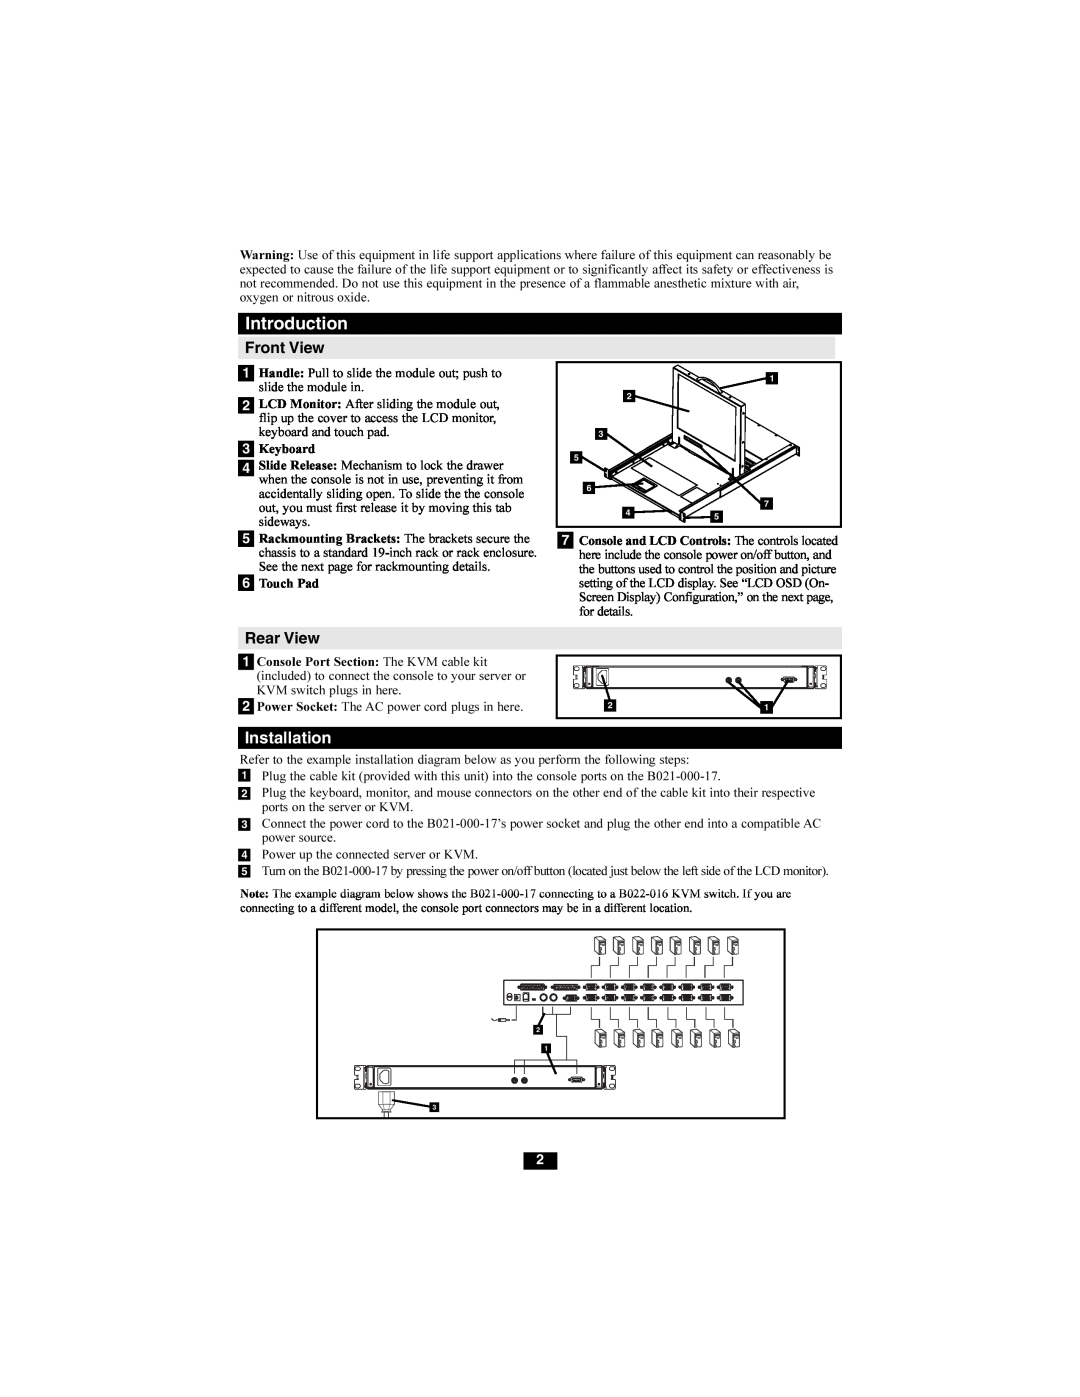 Tripp Lite B021-000-17 owner manual Introduction, Front View, Rear View, Installation 